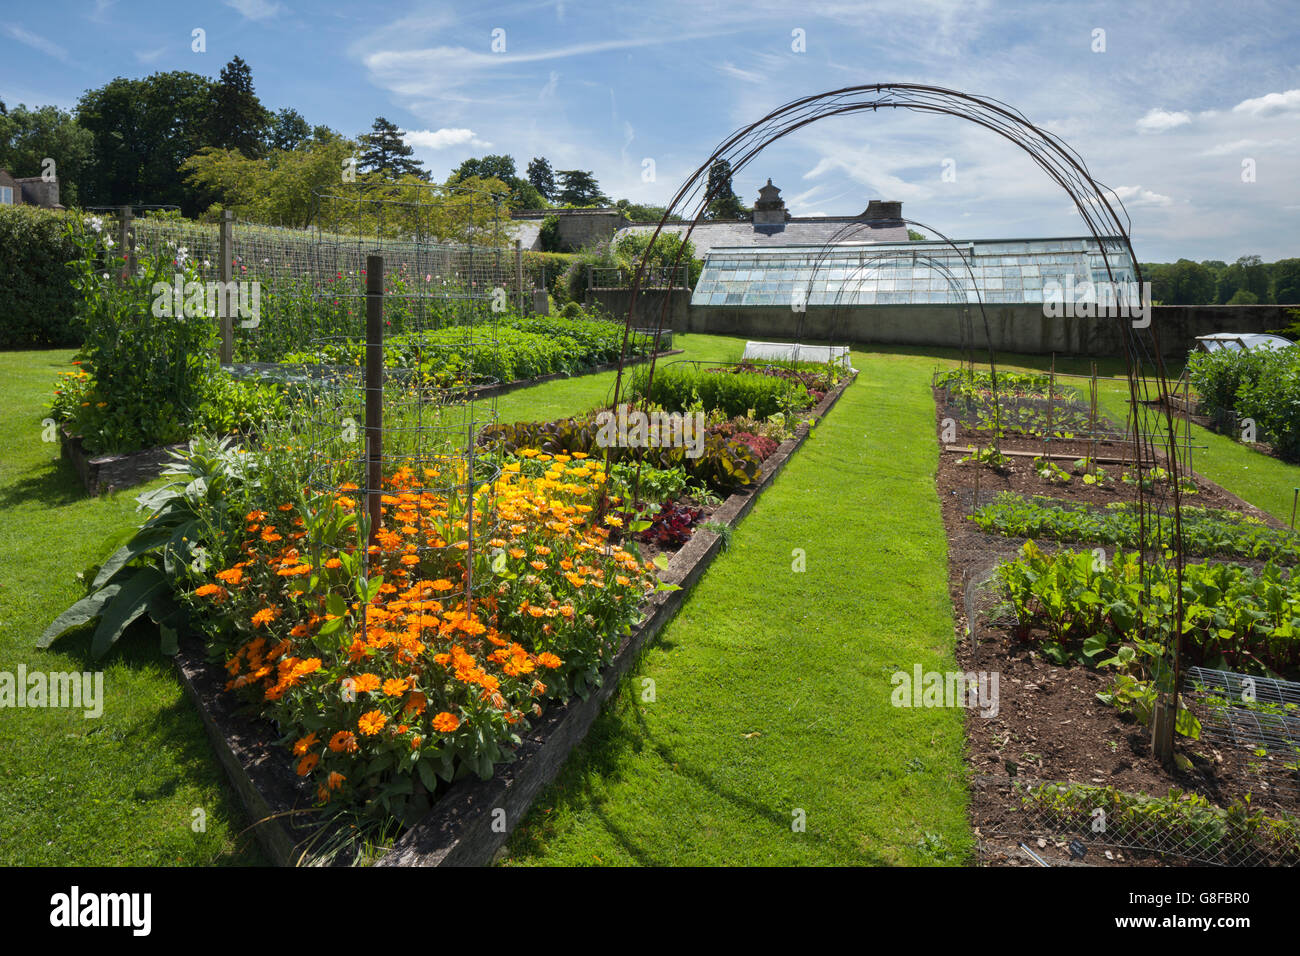 Marigolds and sweet peas growing in the vegetable garden of Easton Walled Garden to attract pollinating bees and insects, Lincolnshire, England Stock Photo